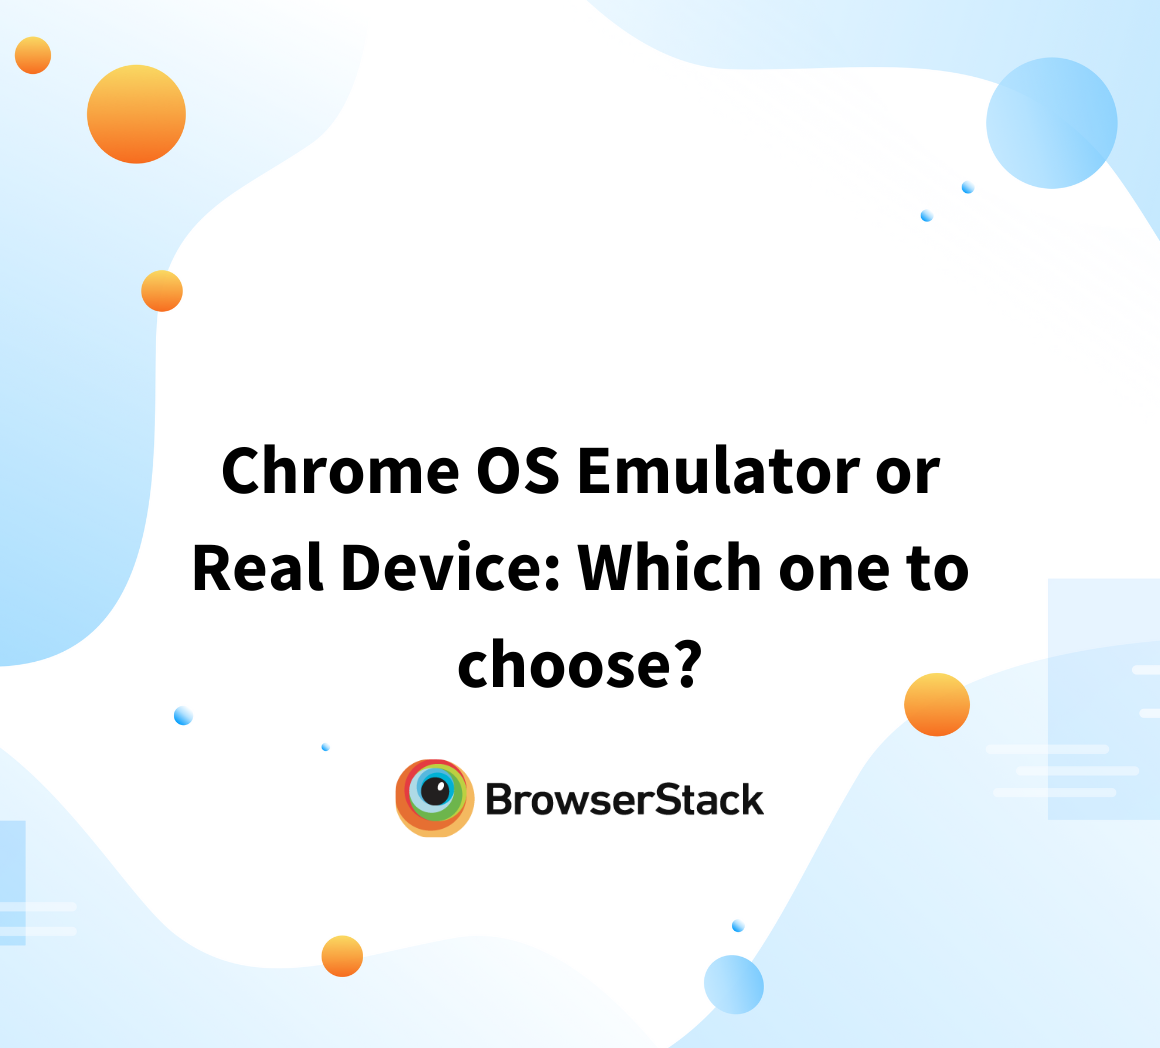 Chrome OS Emulator or Real Device: Which one to choose? | BrowserStack